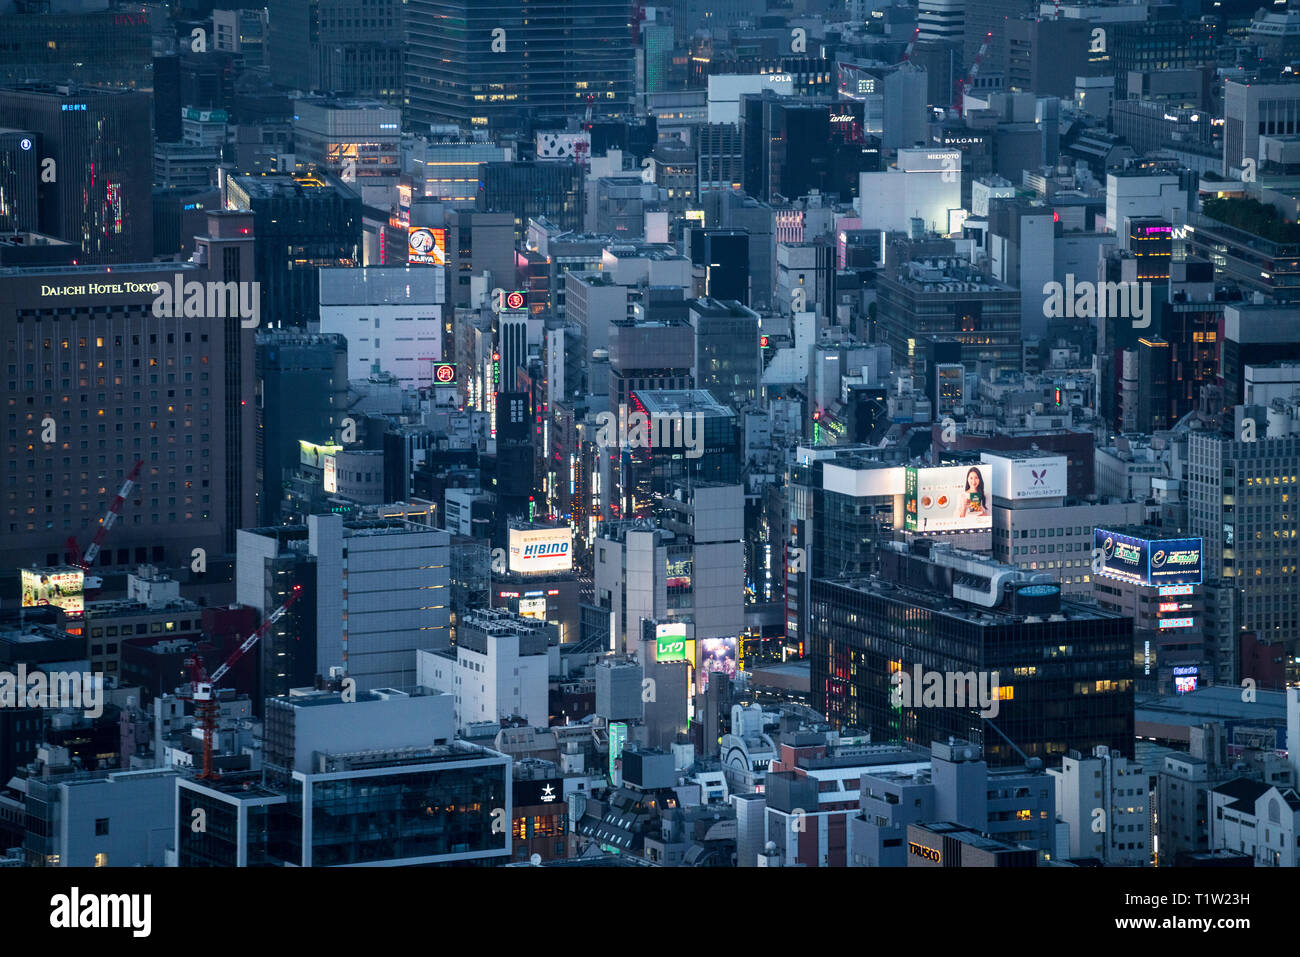 Aerial view of Tokyo skyline at night with advertisements billboards and signs Stock Photo